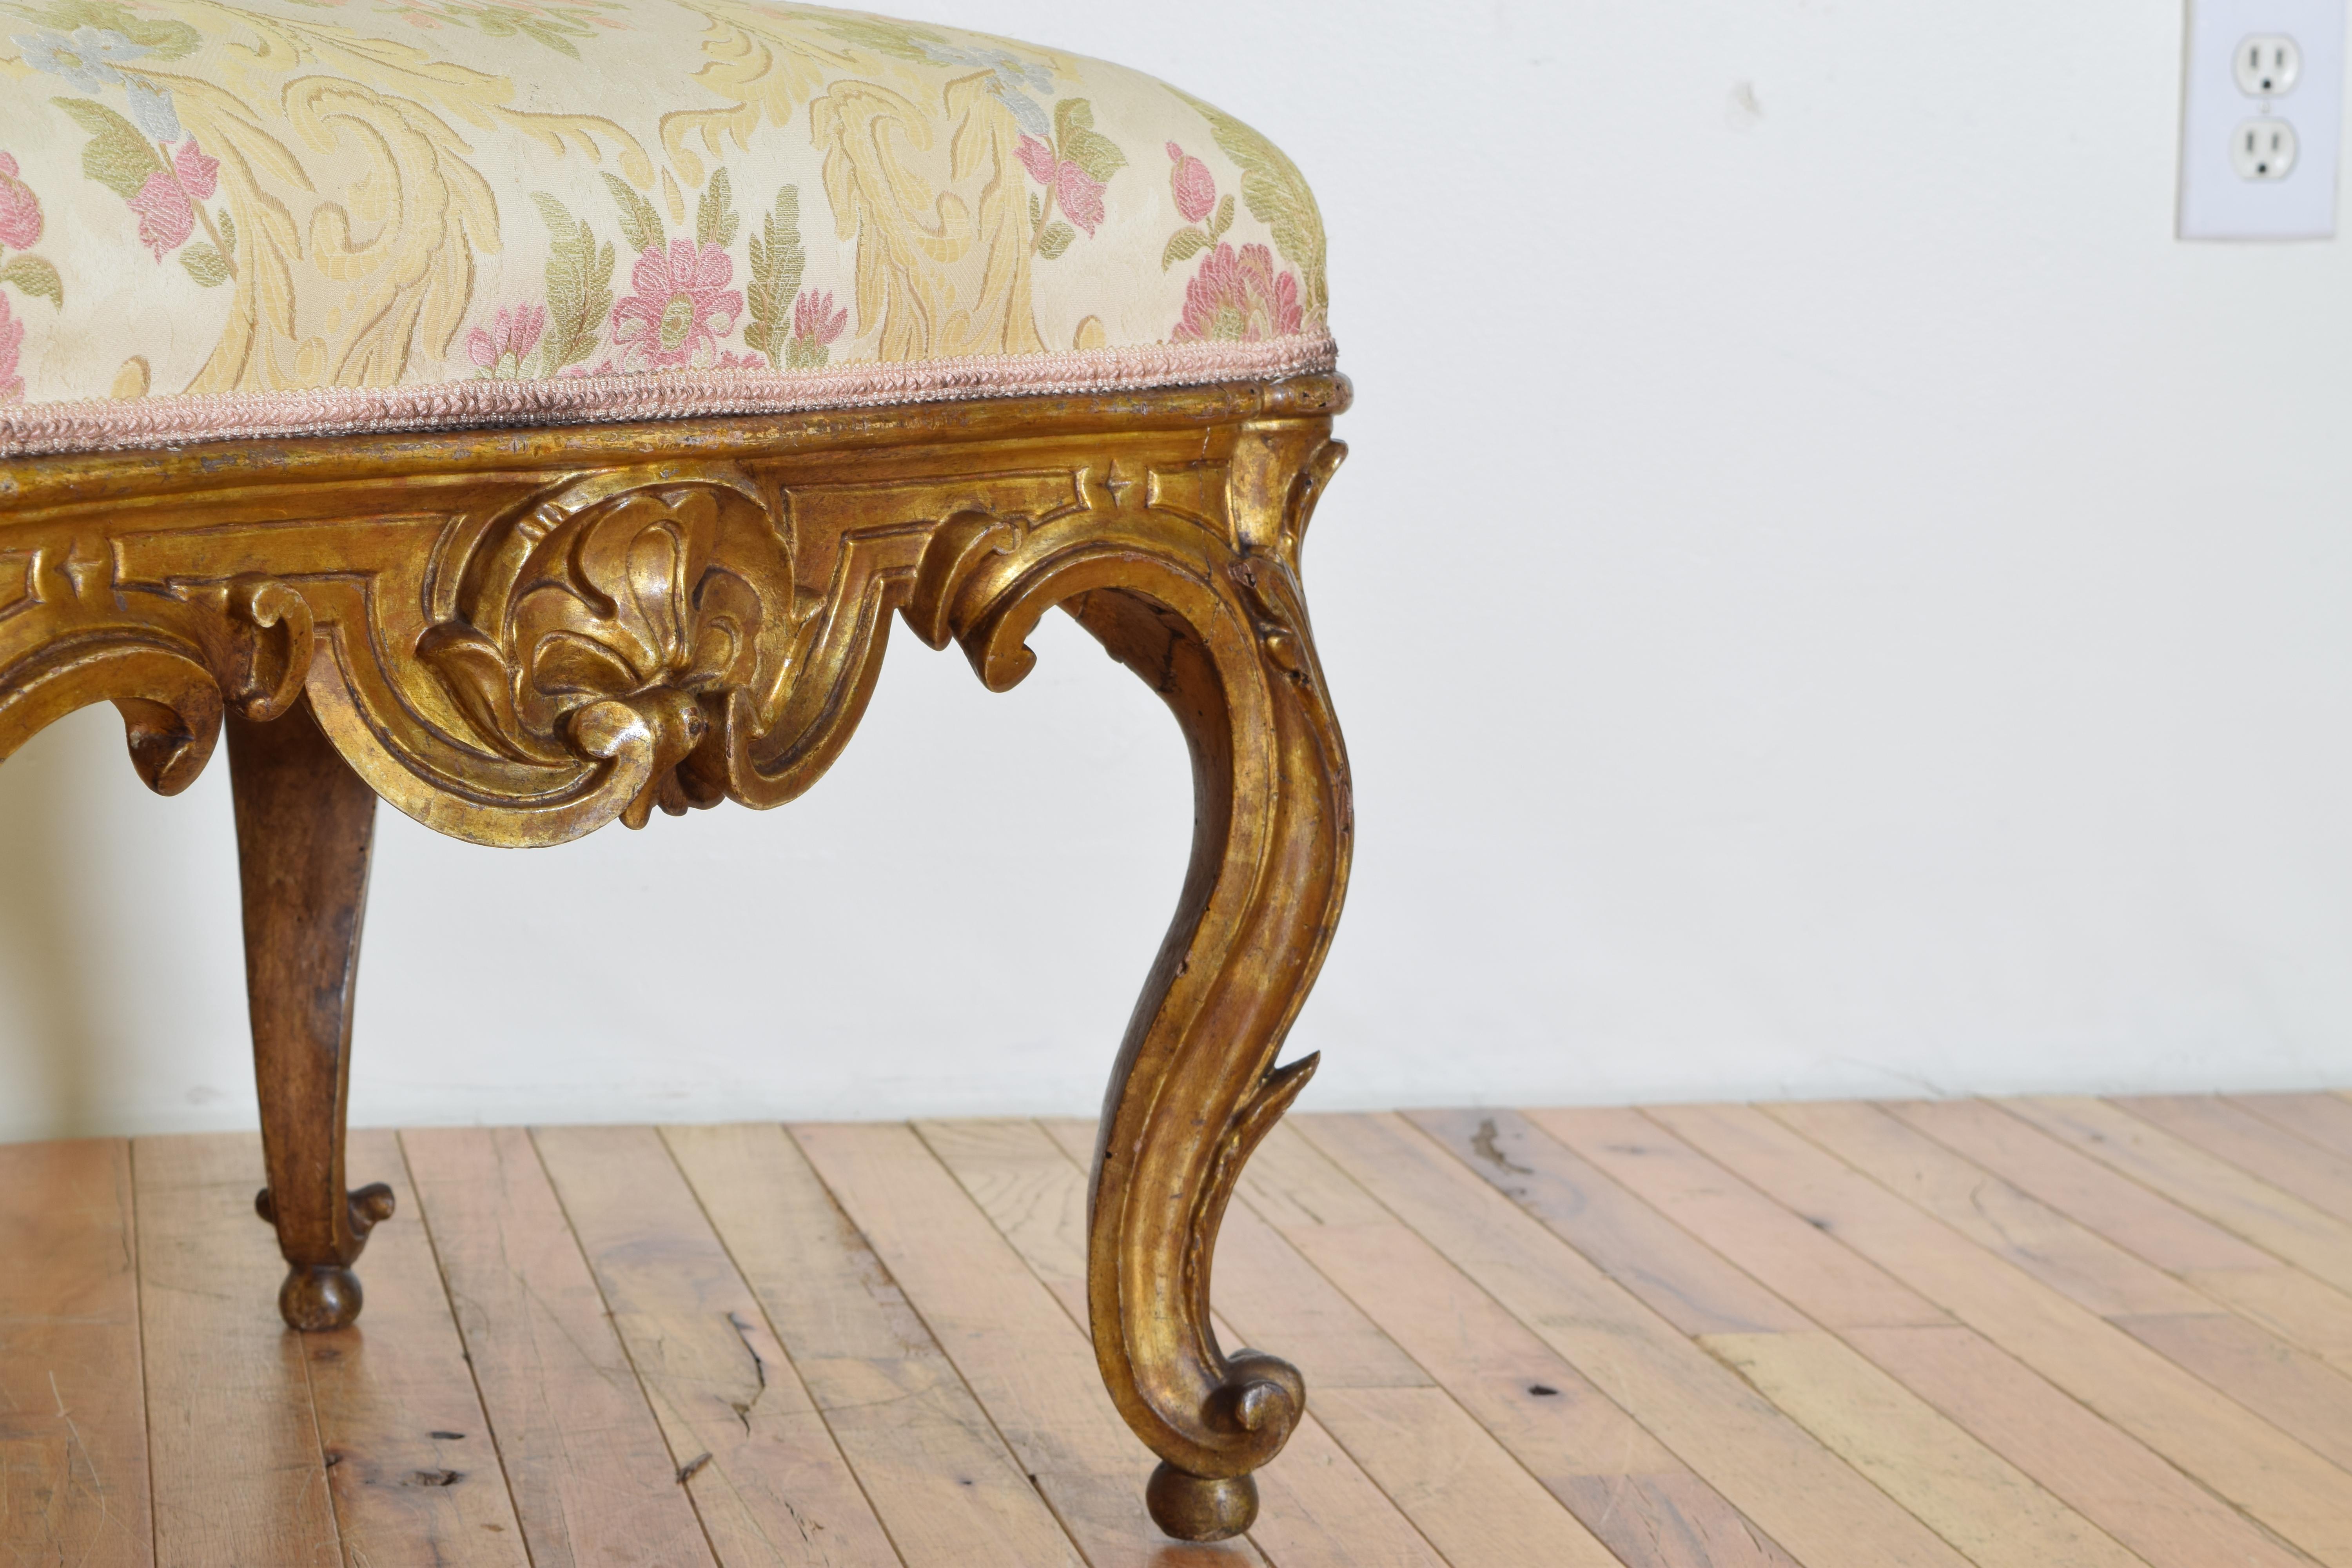 Italian Rococo Revival Carved Giltwood Bench, 3rd Quarter 19th Century For Sale 3